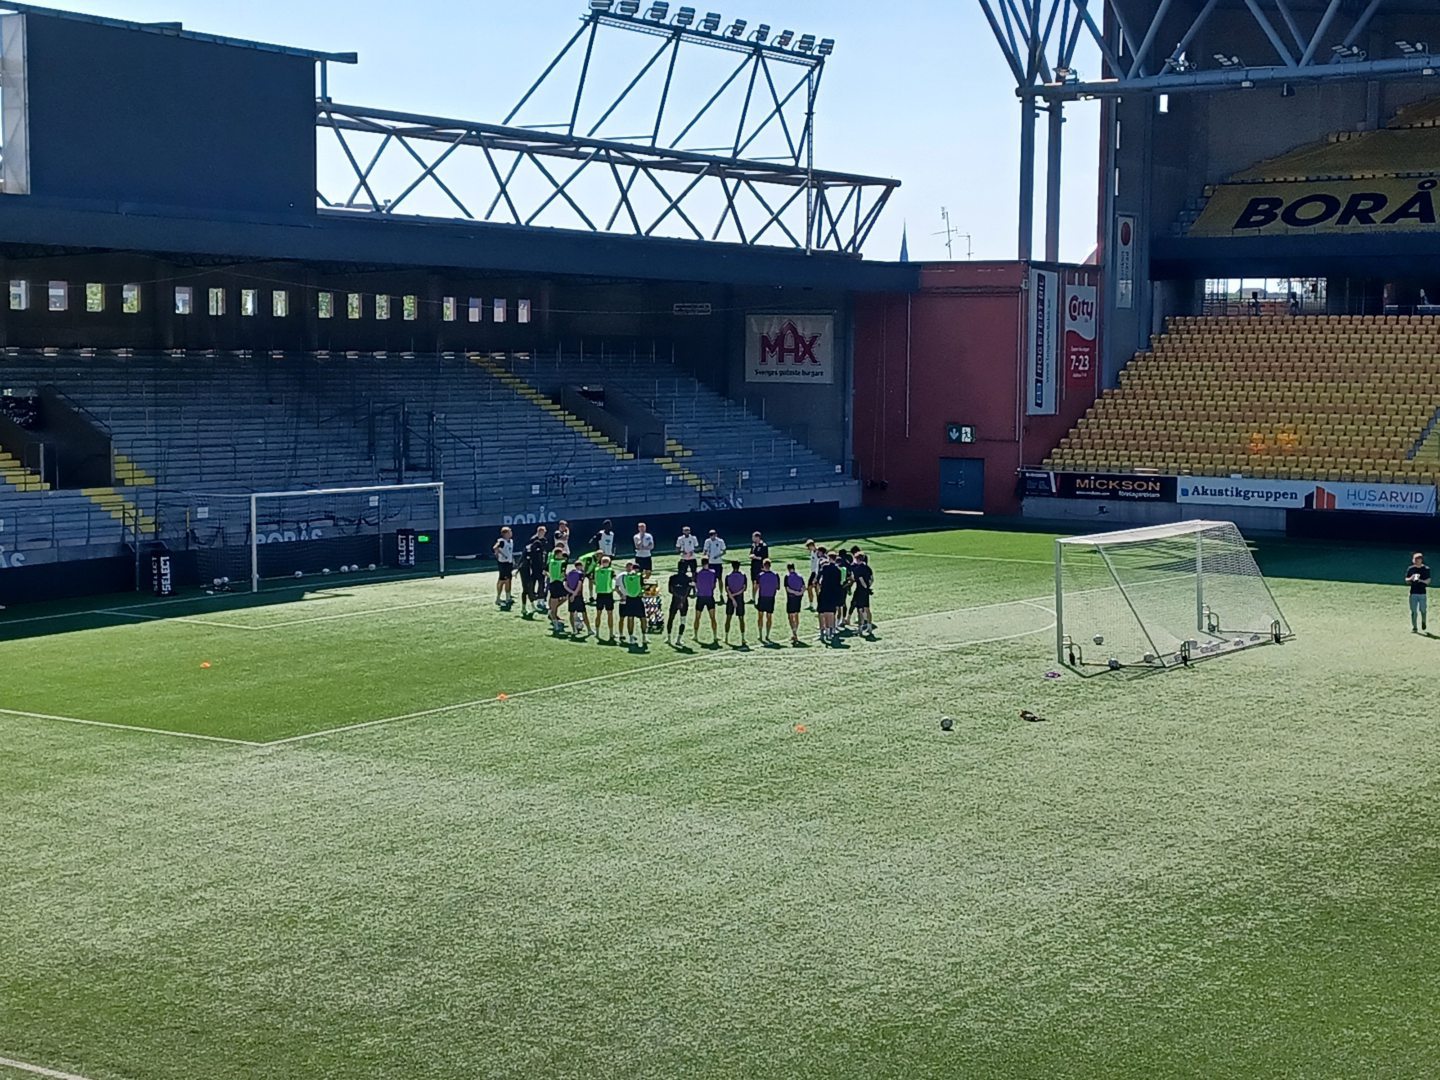 New Aberdeen manager Jimmy Thelin taking Elfsborg training at the Boras Arena, Sweden Image: DC Thomson 